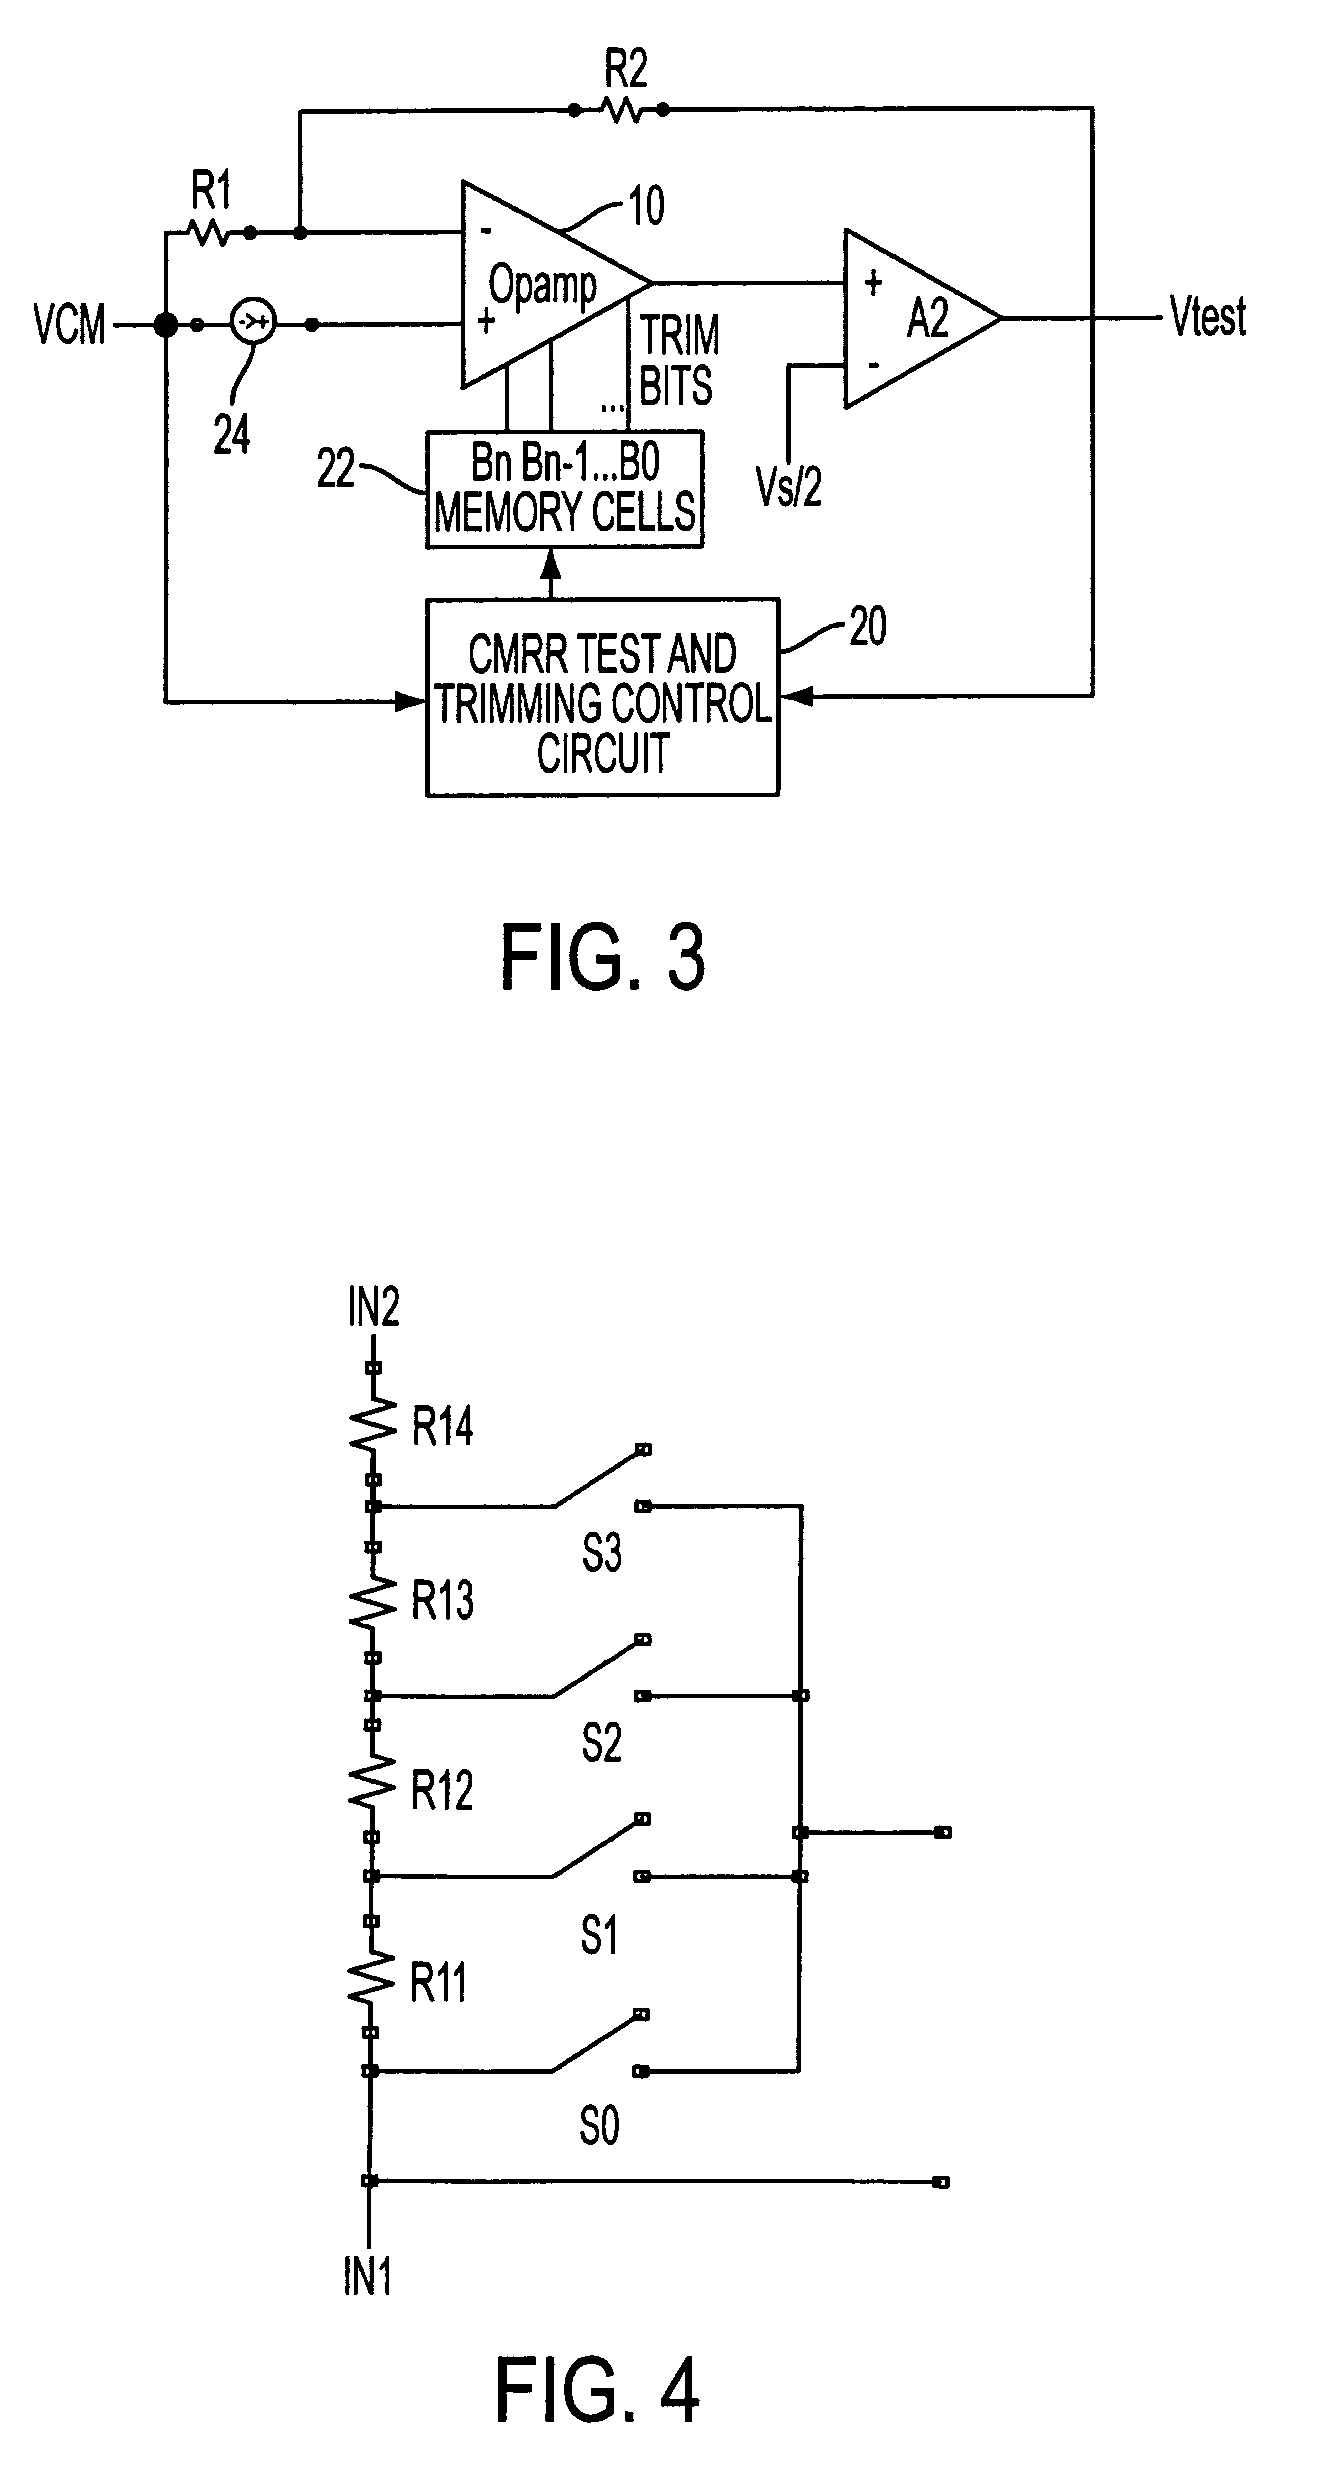 Common mode rejection ratio trim circuit and methodology